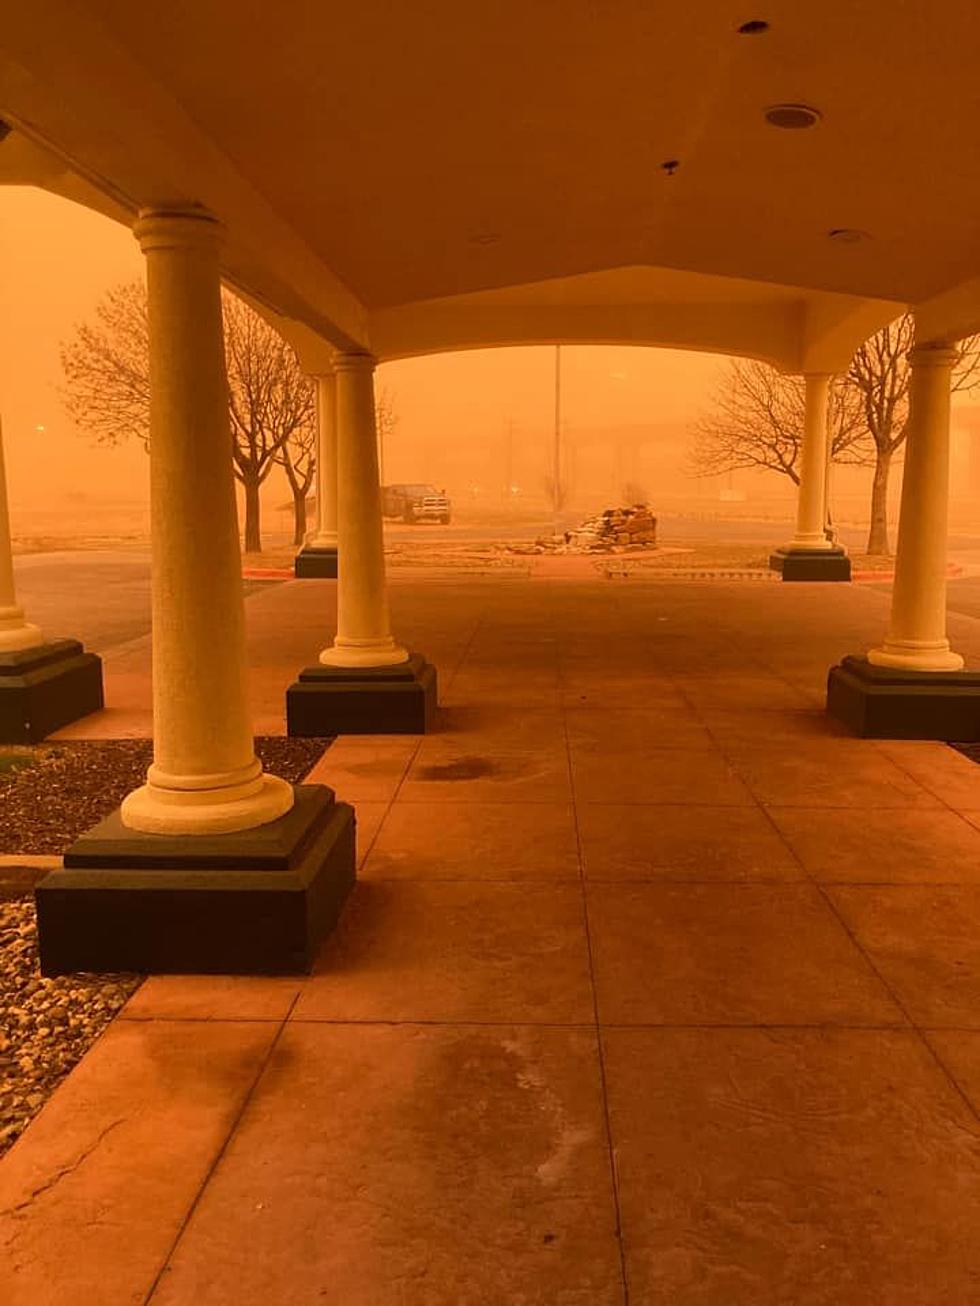 Clear Skies Or Orange Air: Will Lubbock Have a Dust Storm Spring?